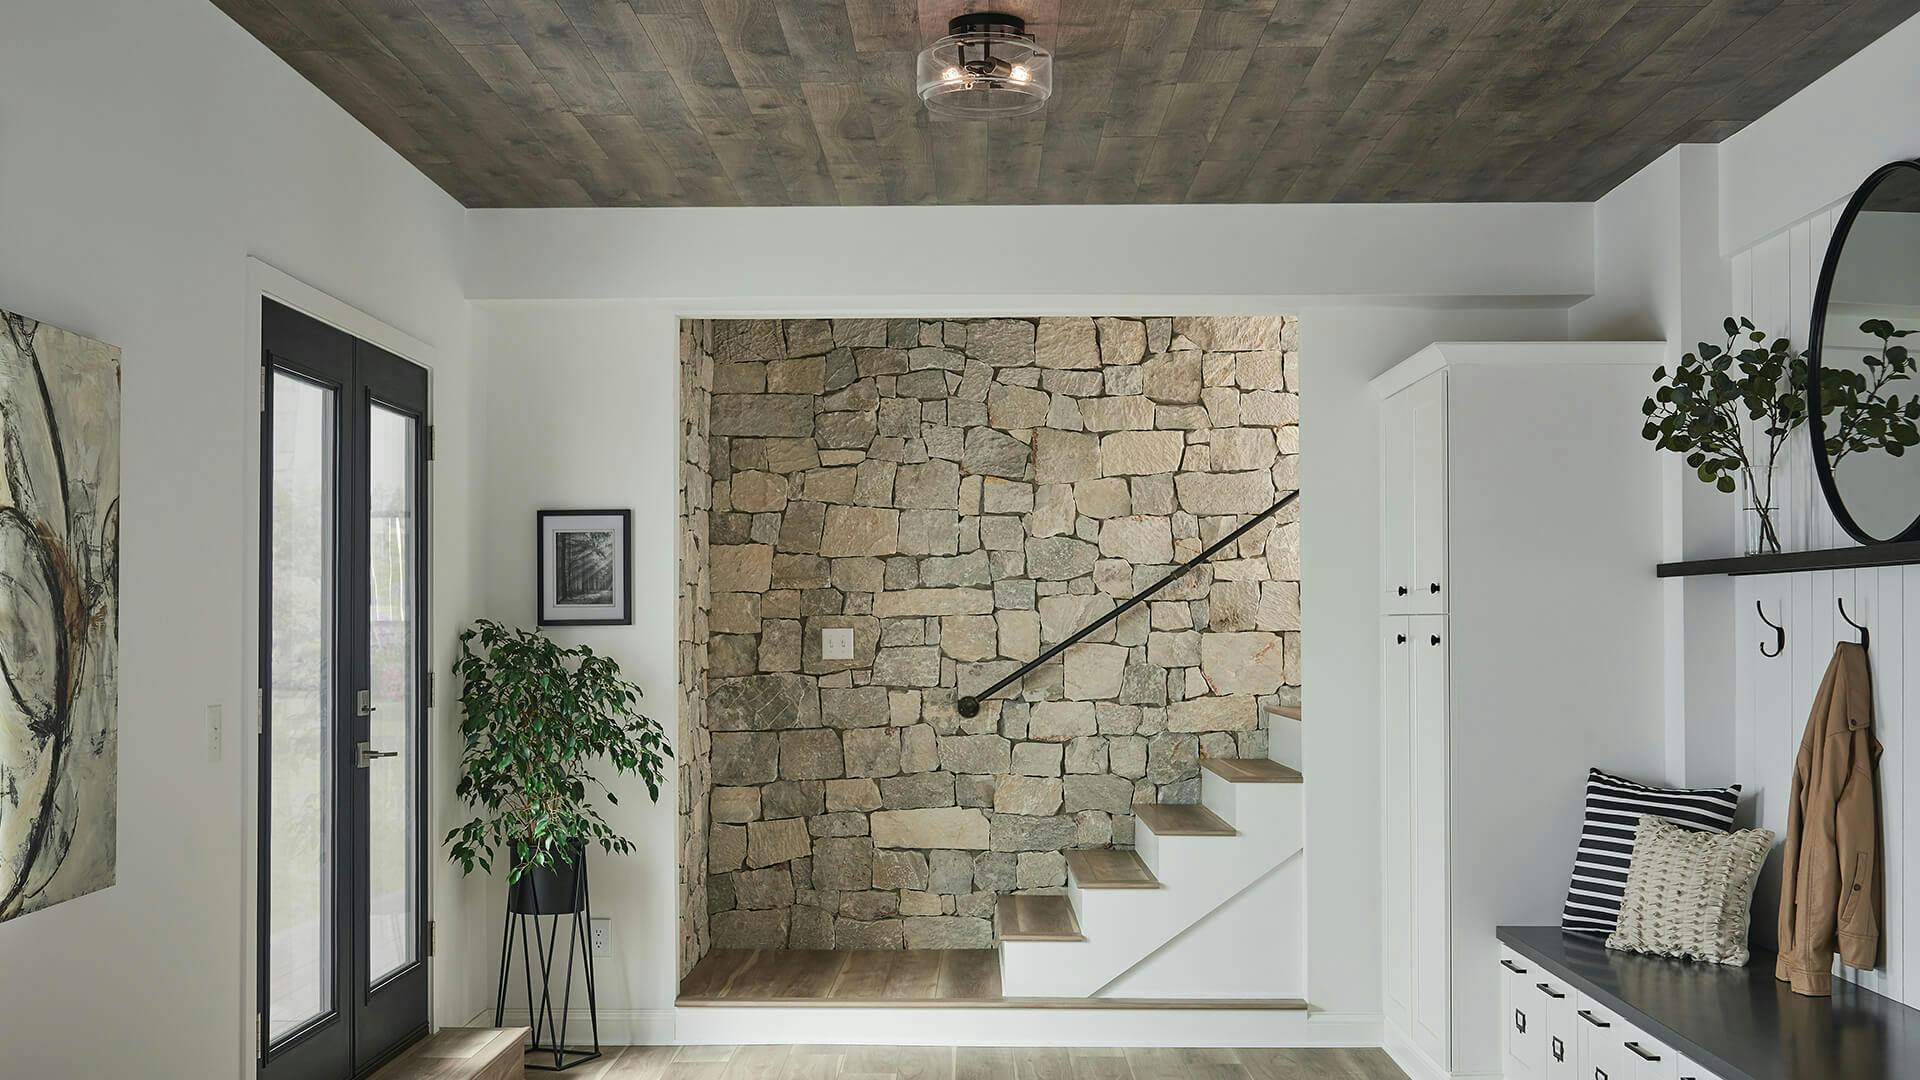 Mudroom with a stone-walled staircase in the background and a lit Alamosa mounted on a wood ceiling